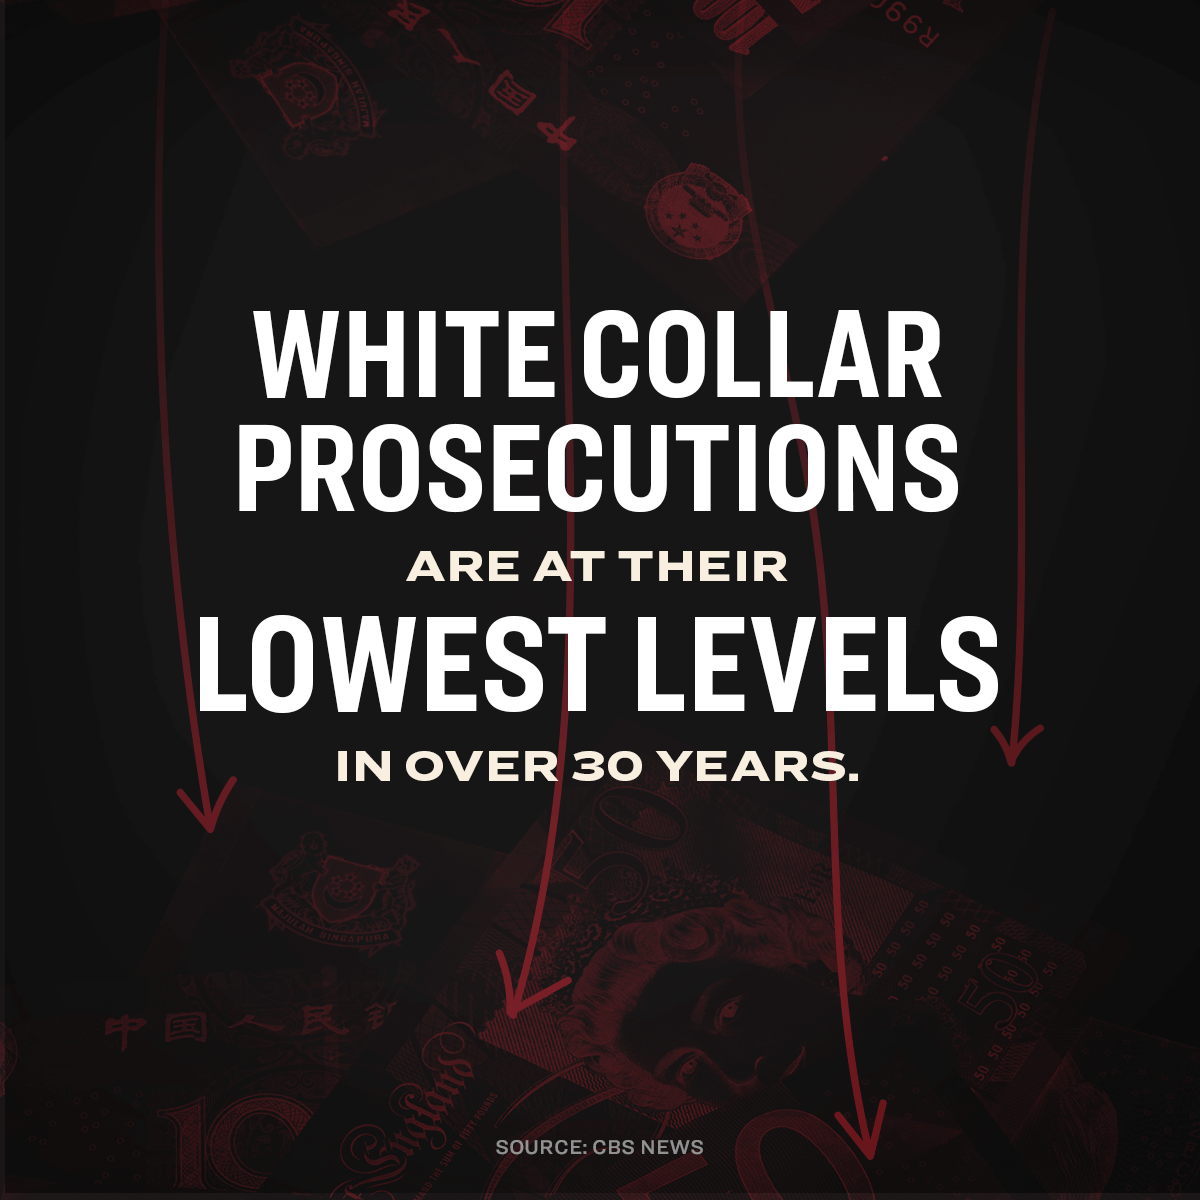 White collar prosecutions are at their lowest level in over 30 years.